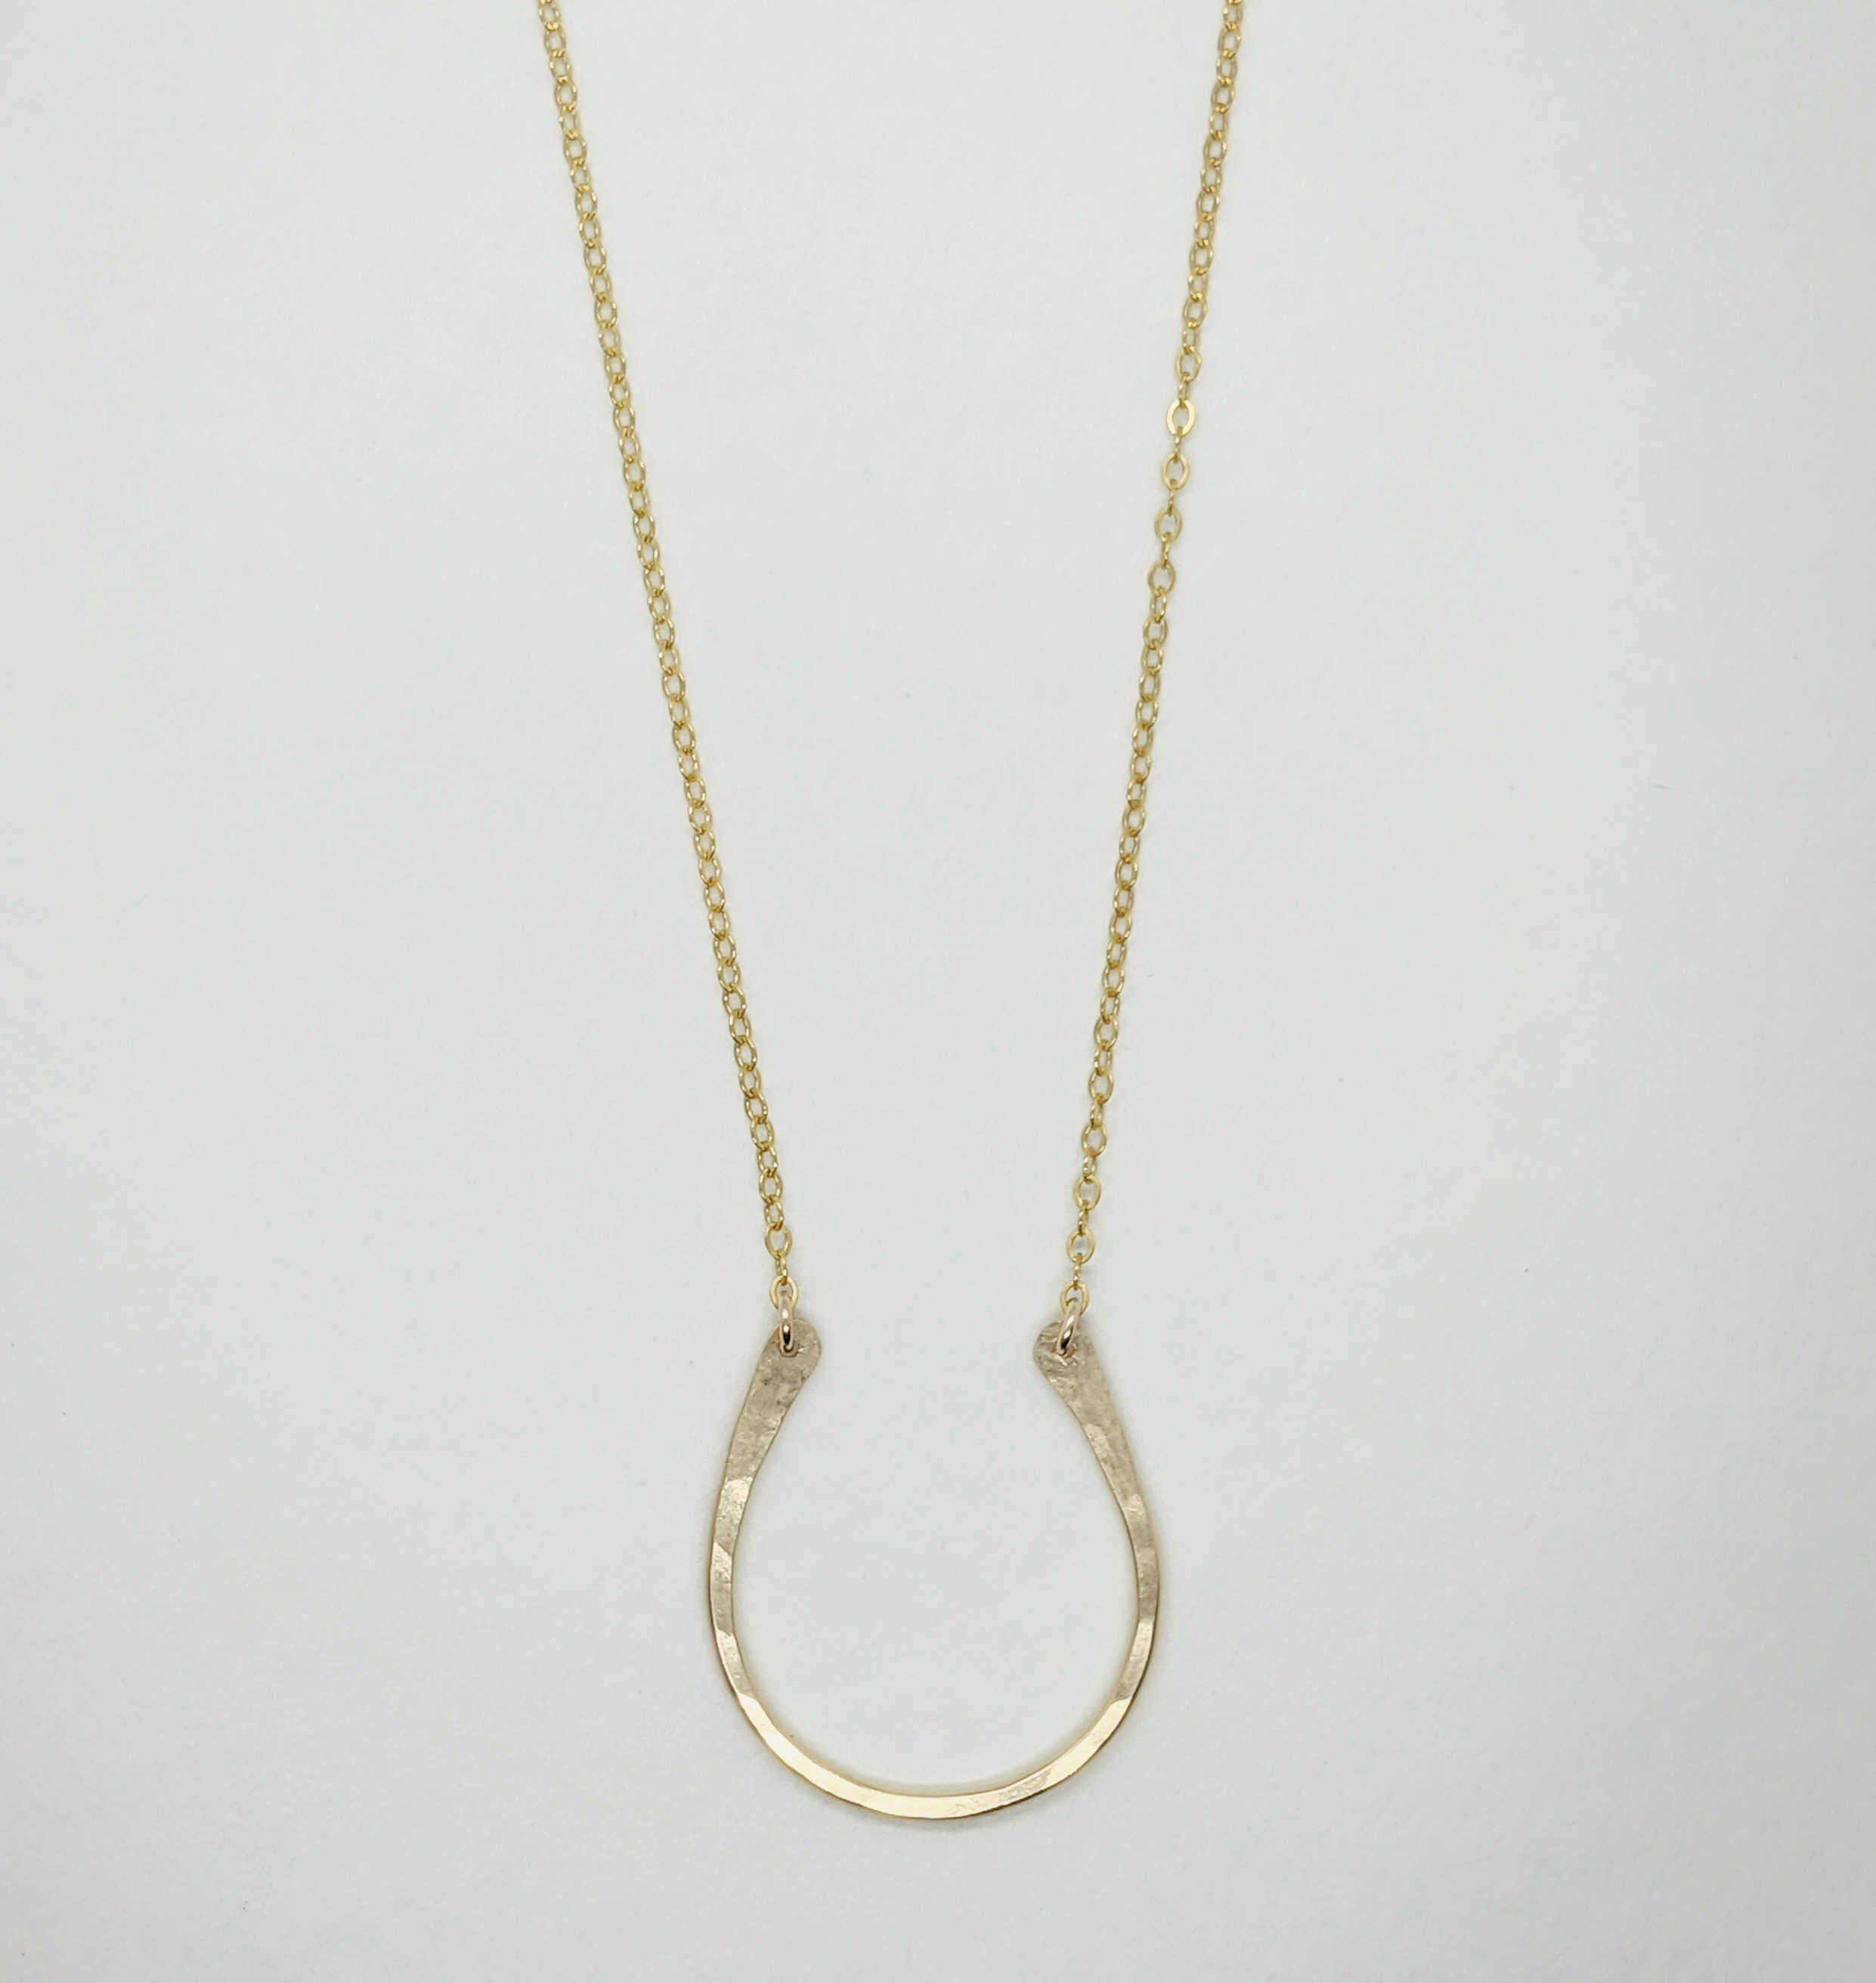 Lucky Horseshoe Necklace • Silver or Gold